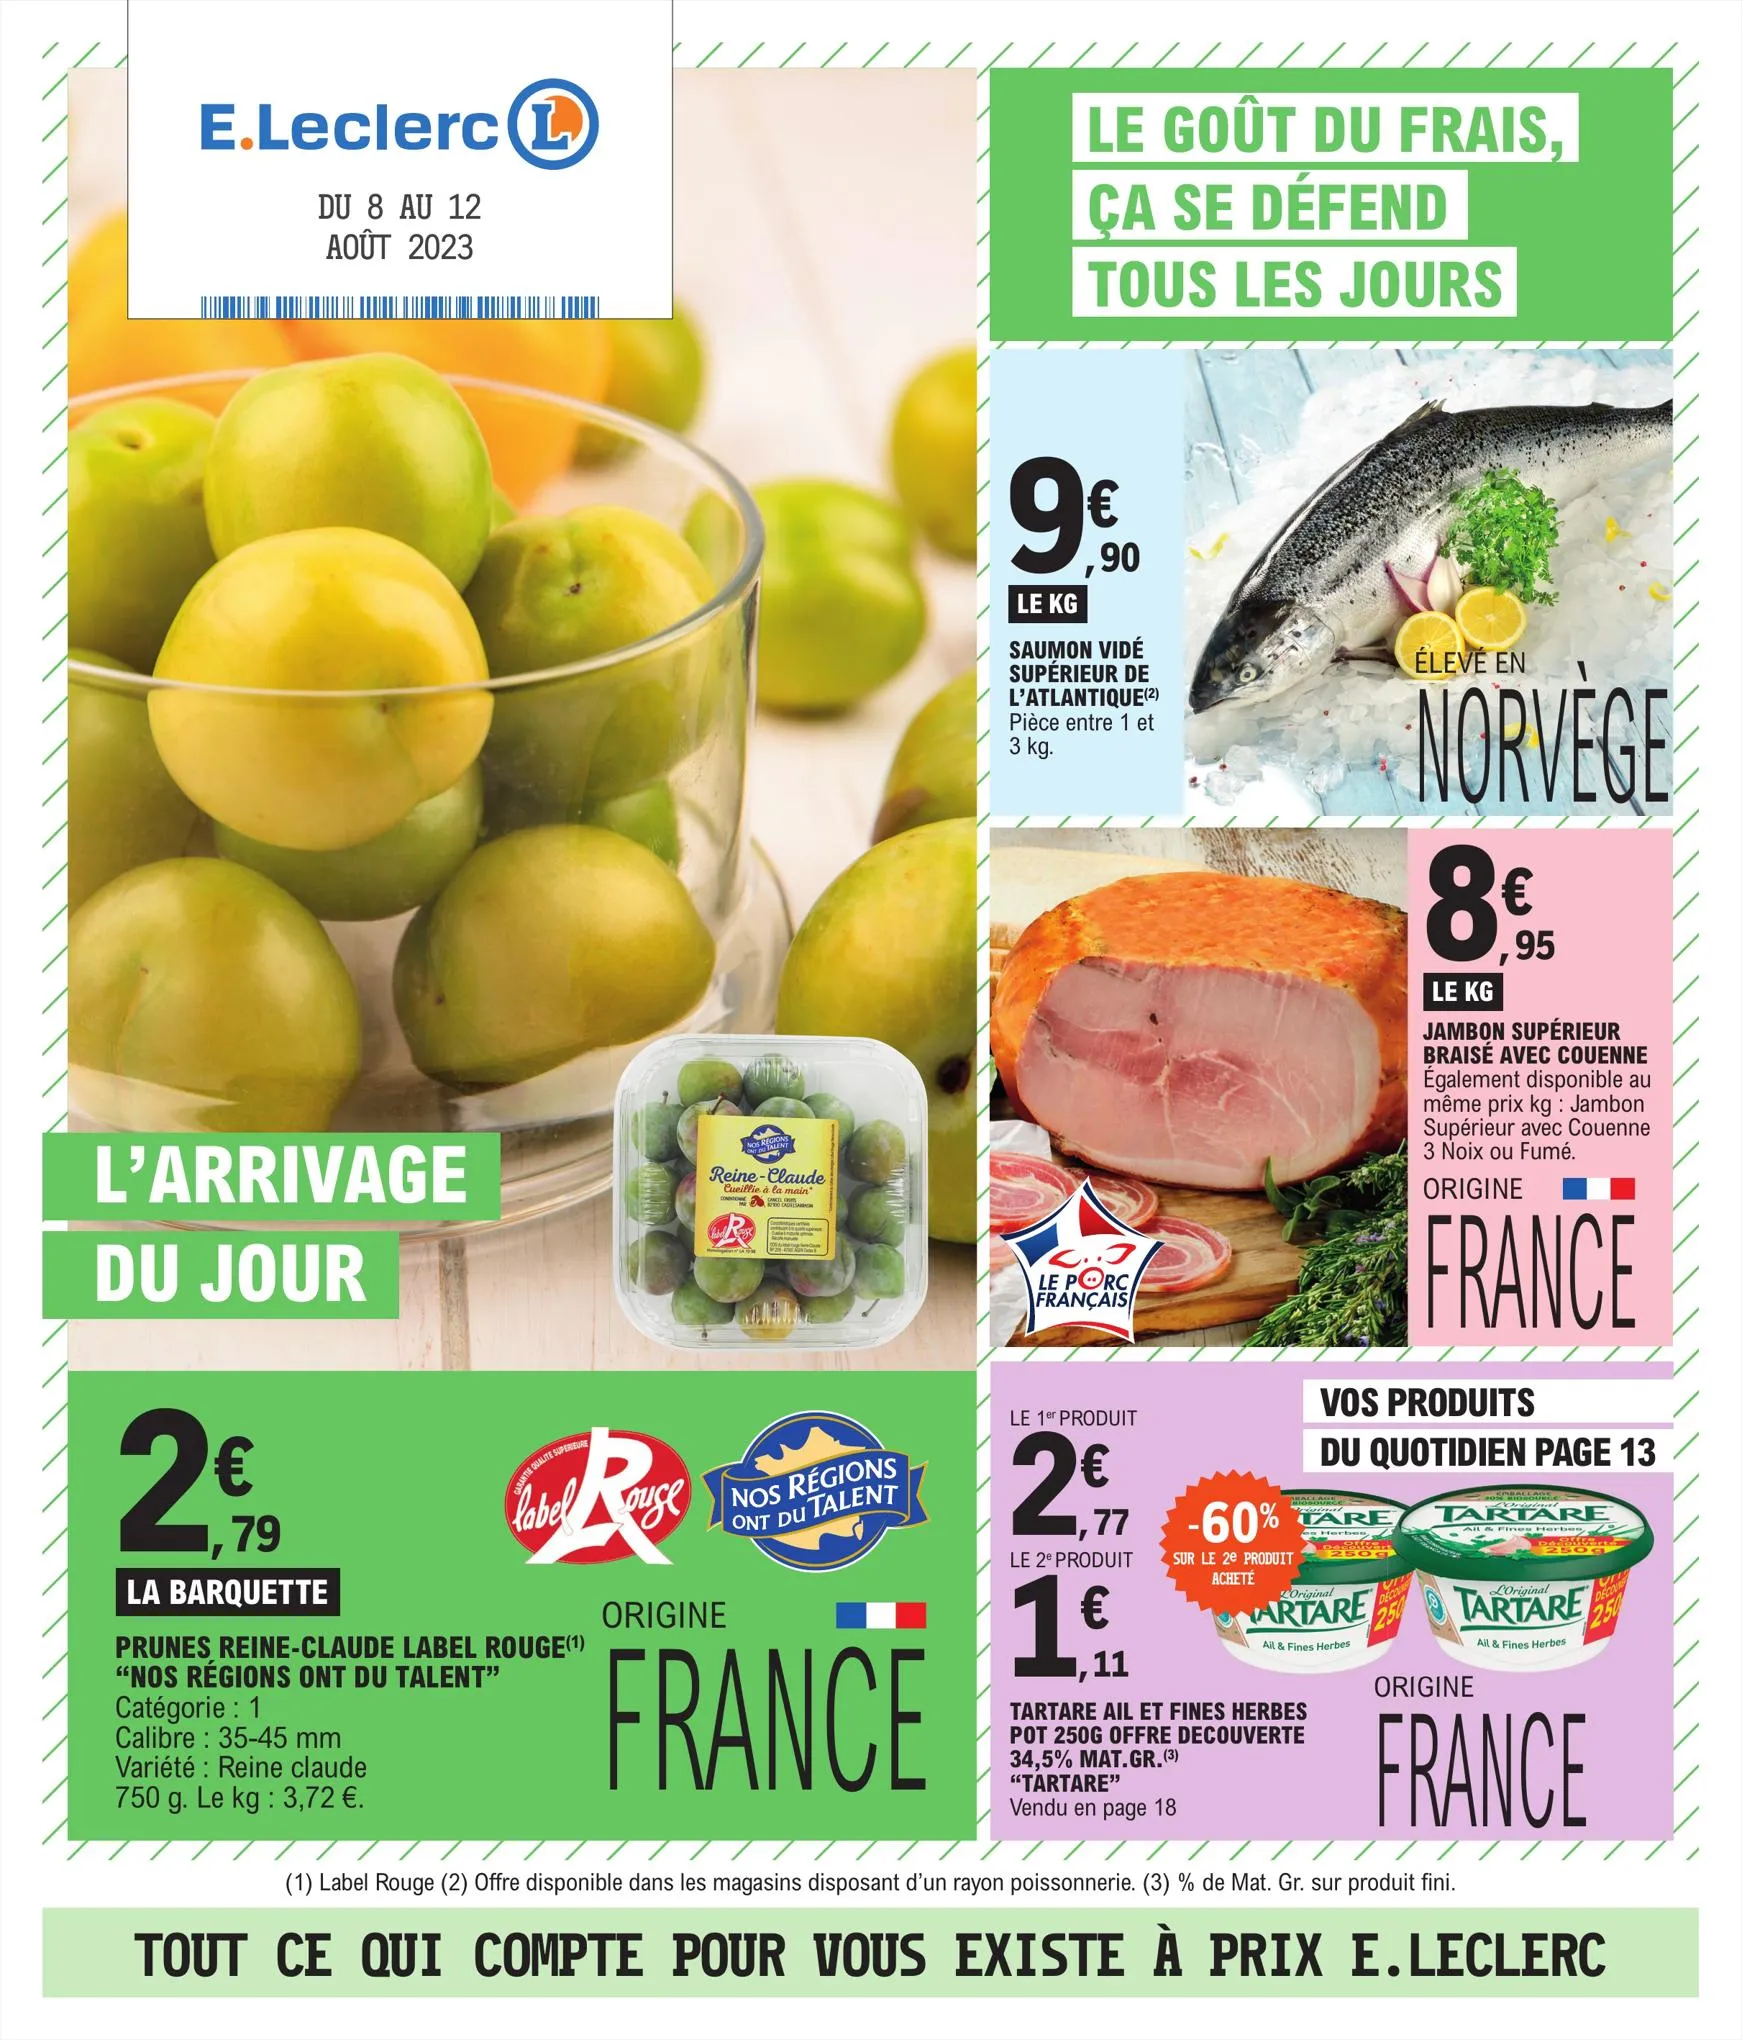 Catalogue Relance Alimentaire 10 - Mixte, page 00001